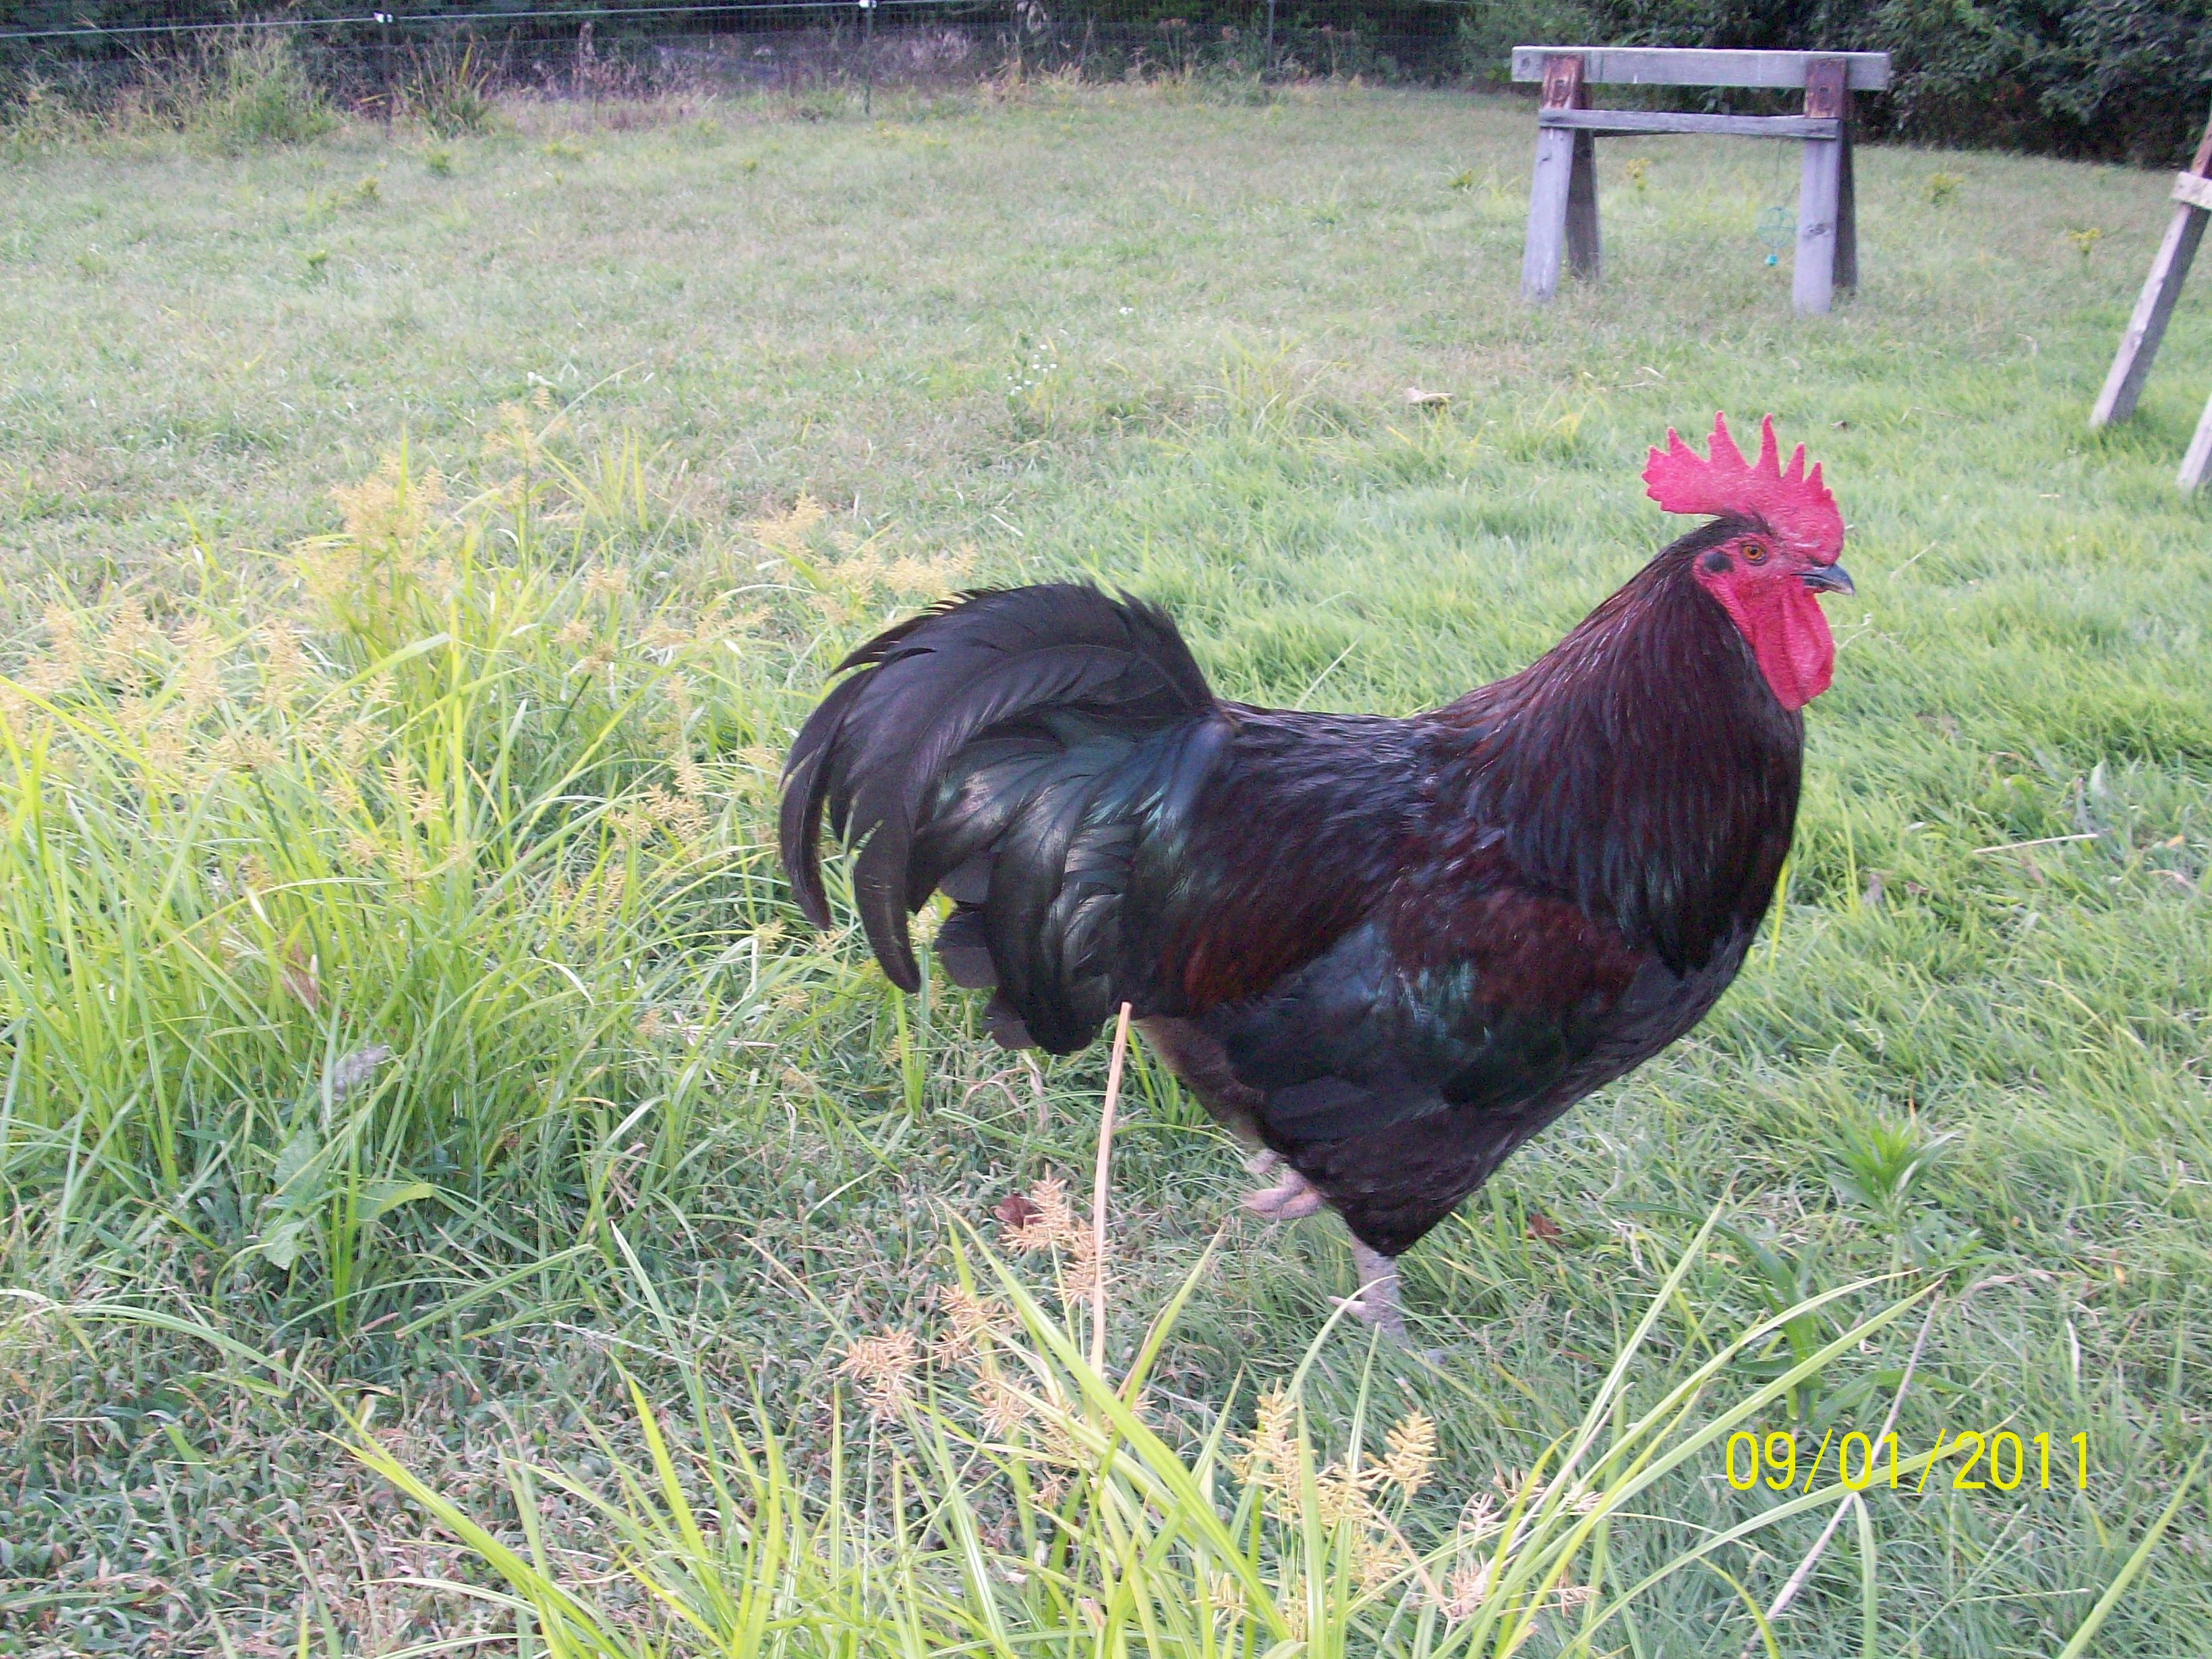 Red the Rhode Island Red/Black Australorp mix rooster.